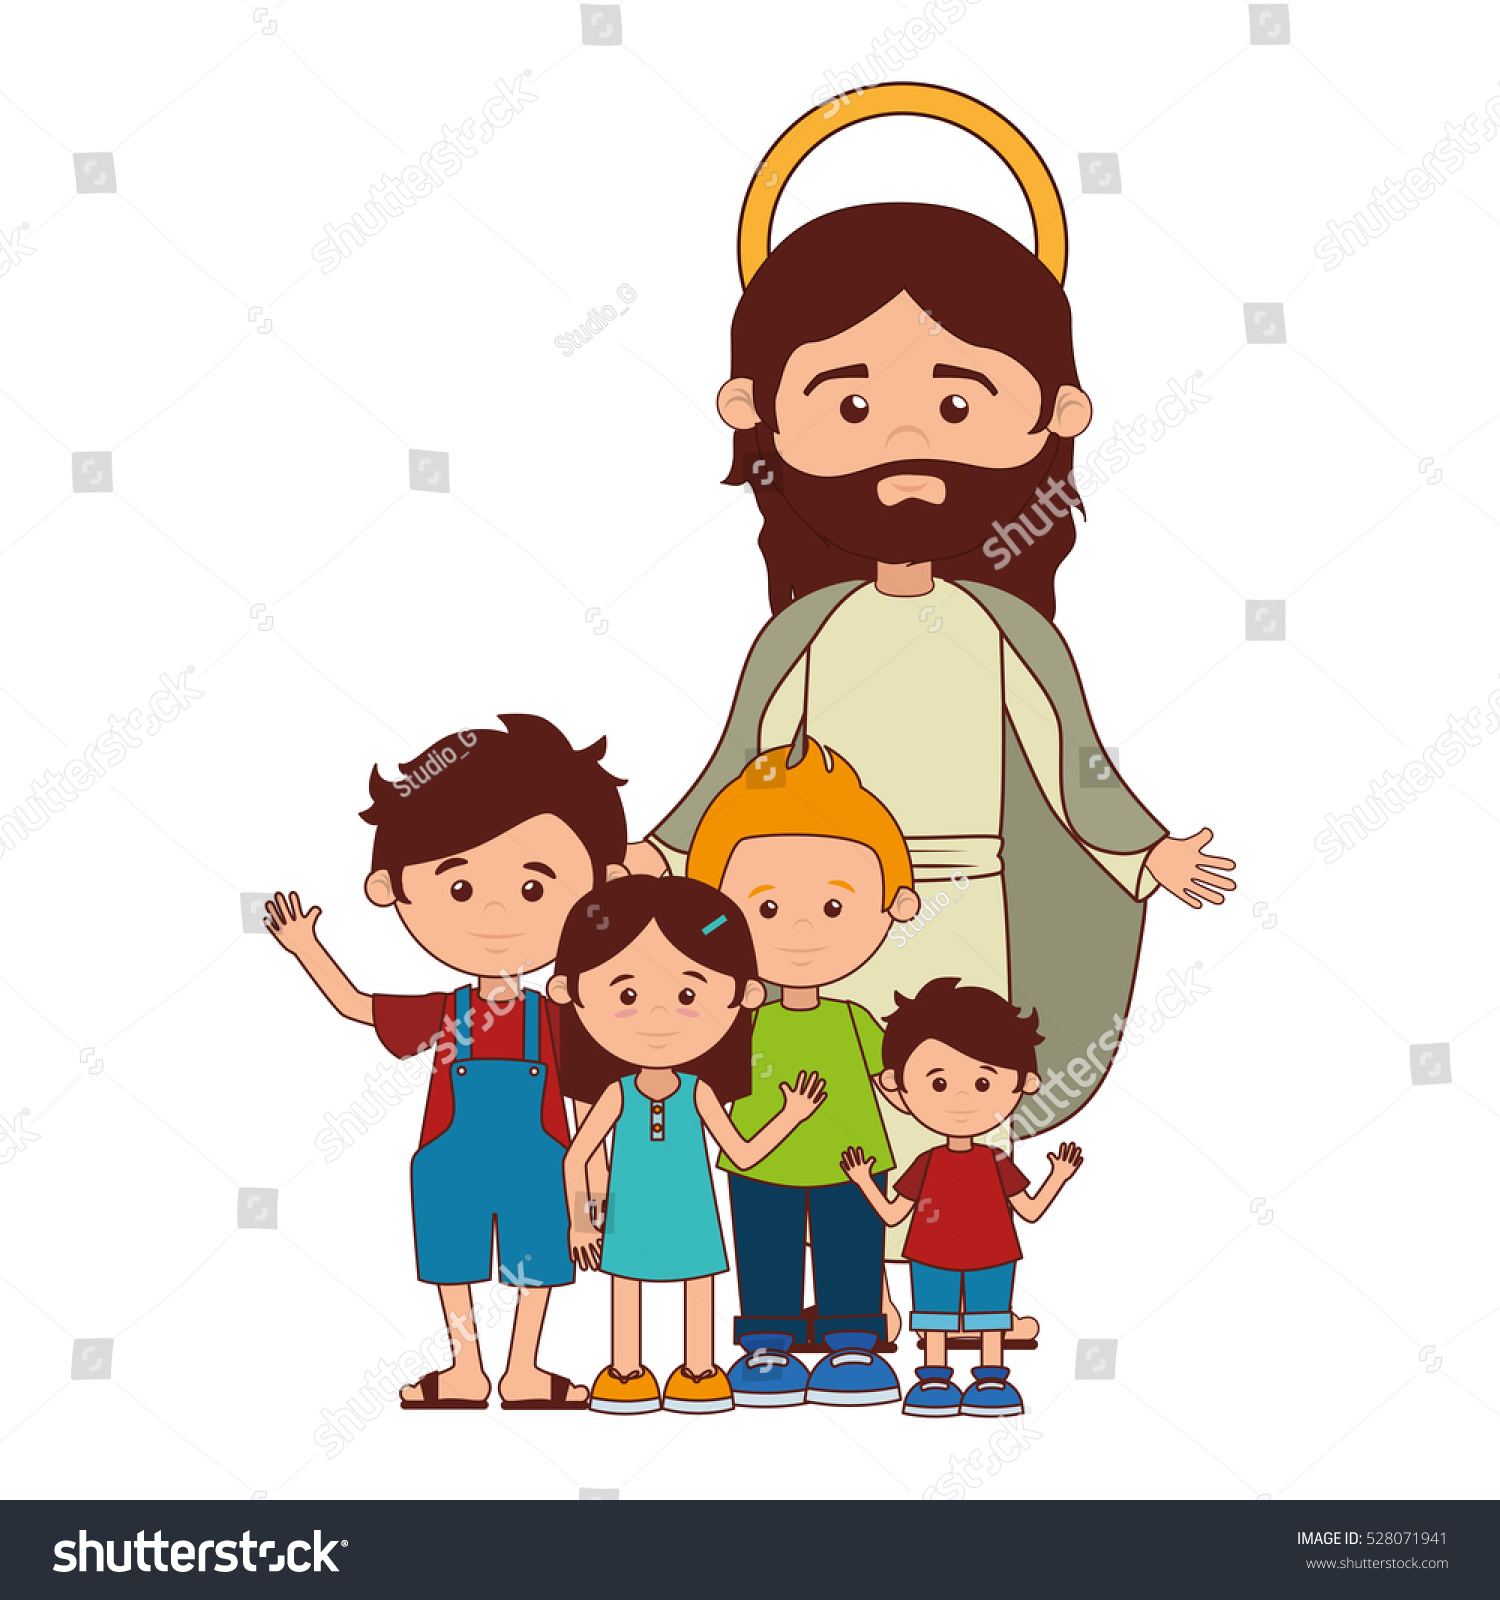 Jesus Christ Character Religious Icon Stock Vector (Royalty Free ...